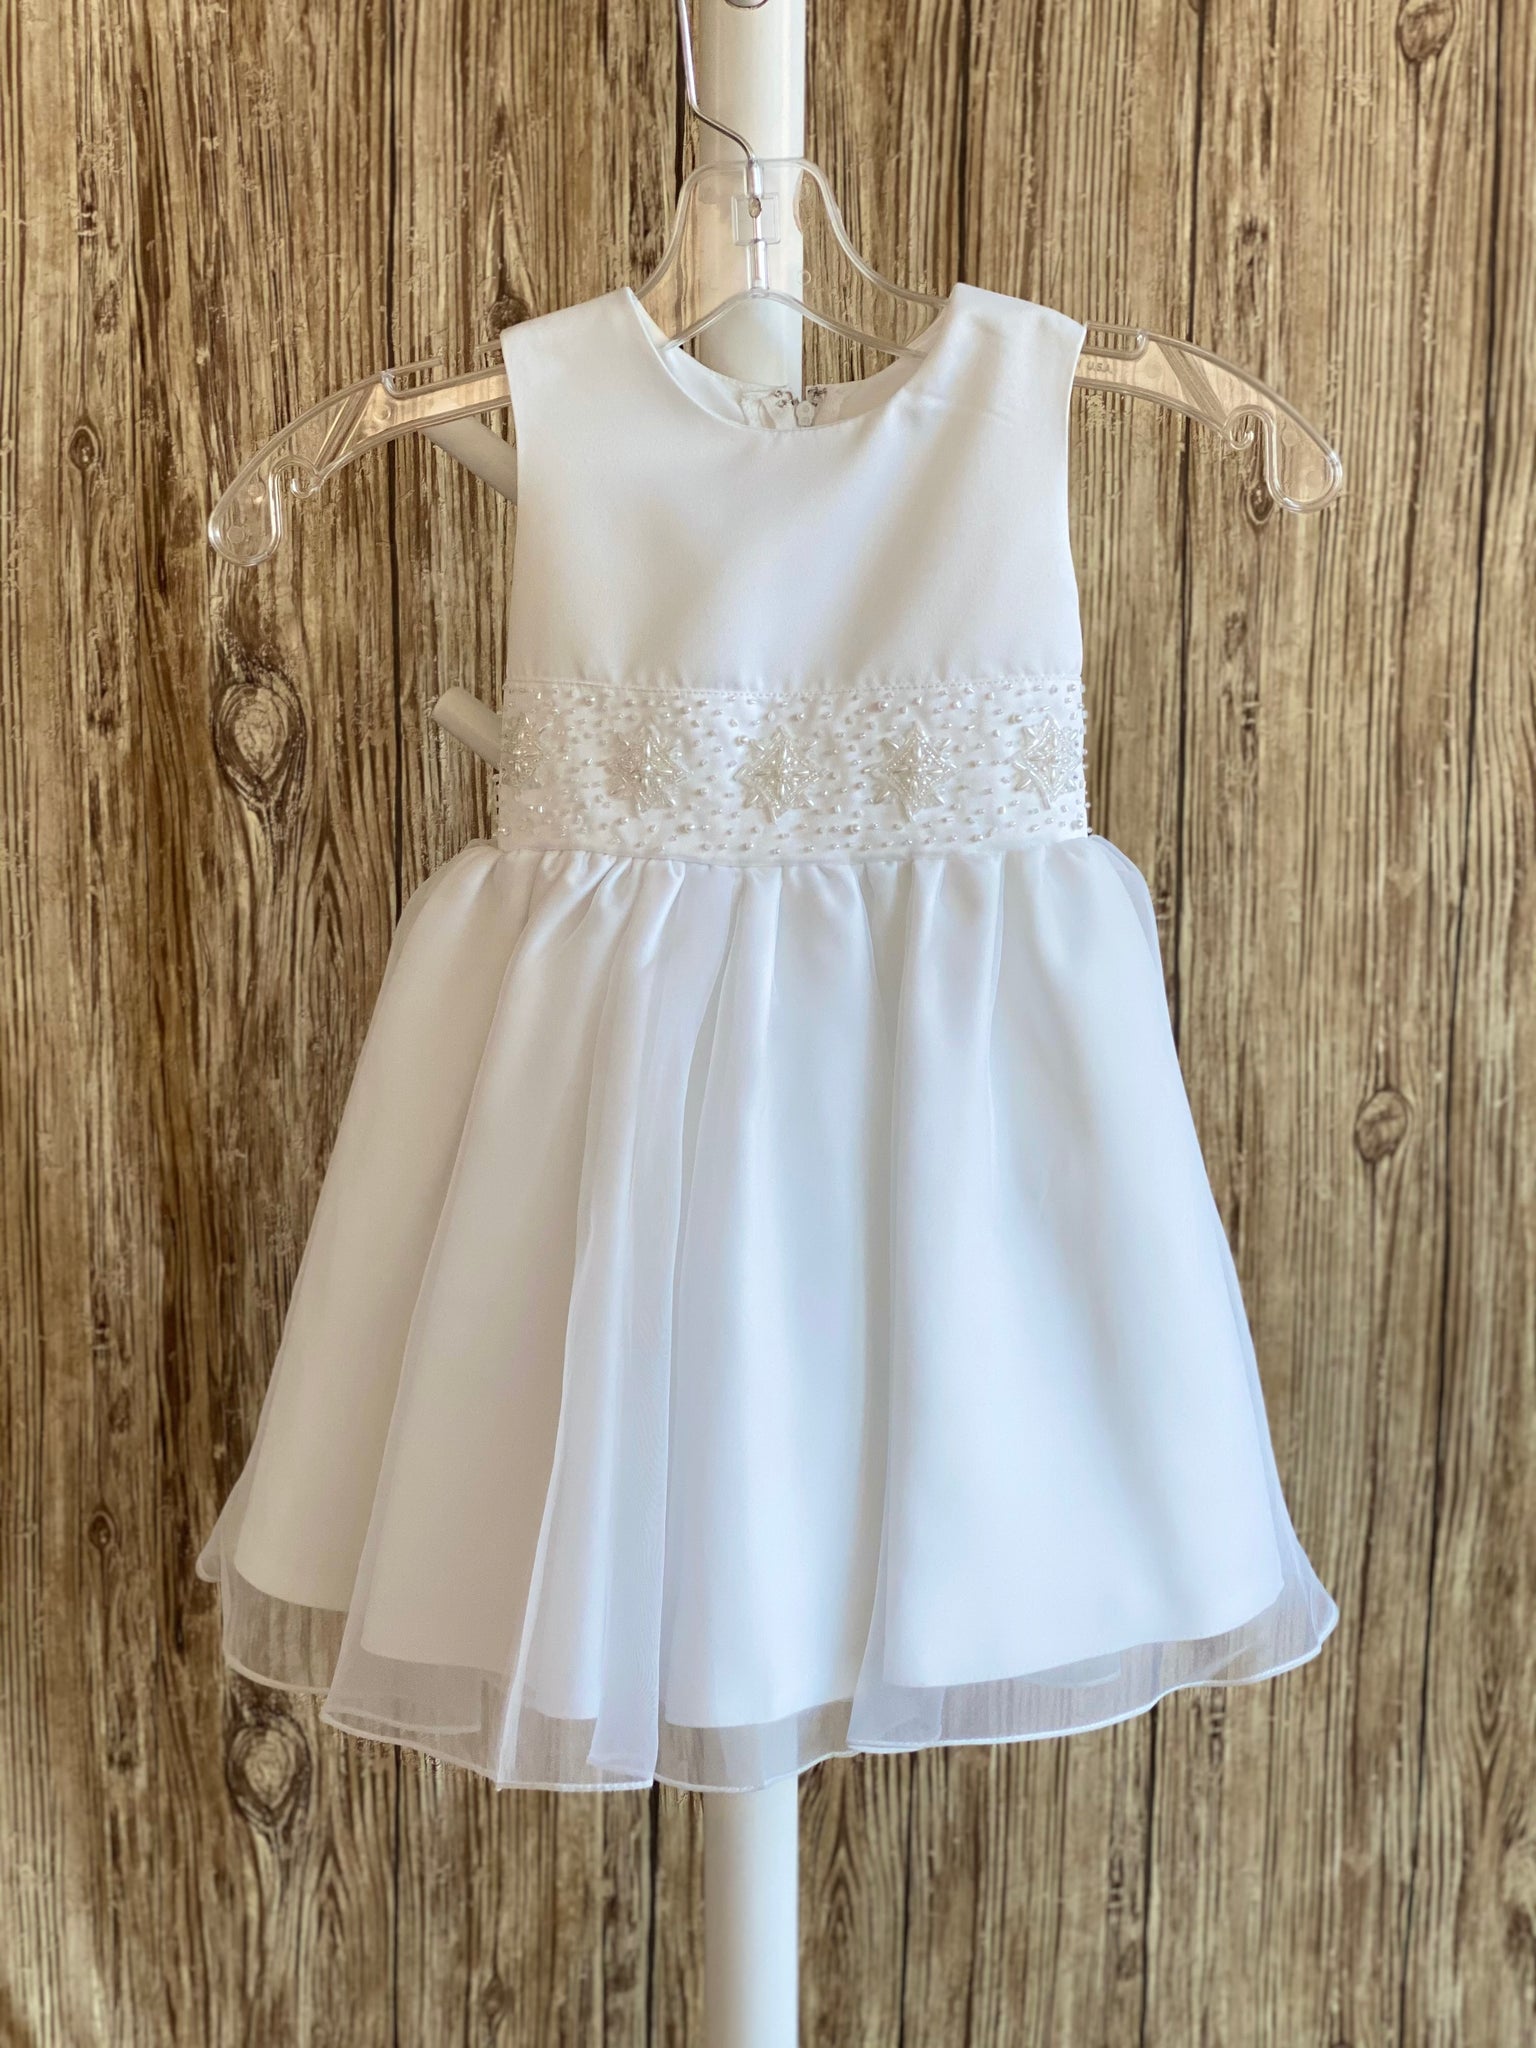 This a beautiful, one-of-a-kind baptism gown.  A lovely gown for a precious child.  White, size 24M Satin bodice with short sleeve beaded detailing along bottom Satin skirting with mesh overlay Zipper closure